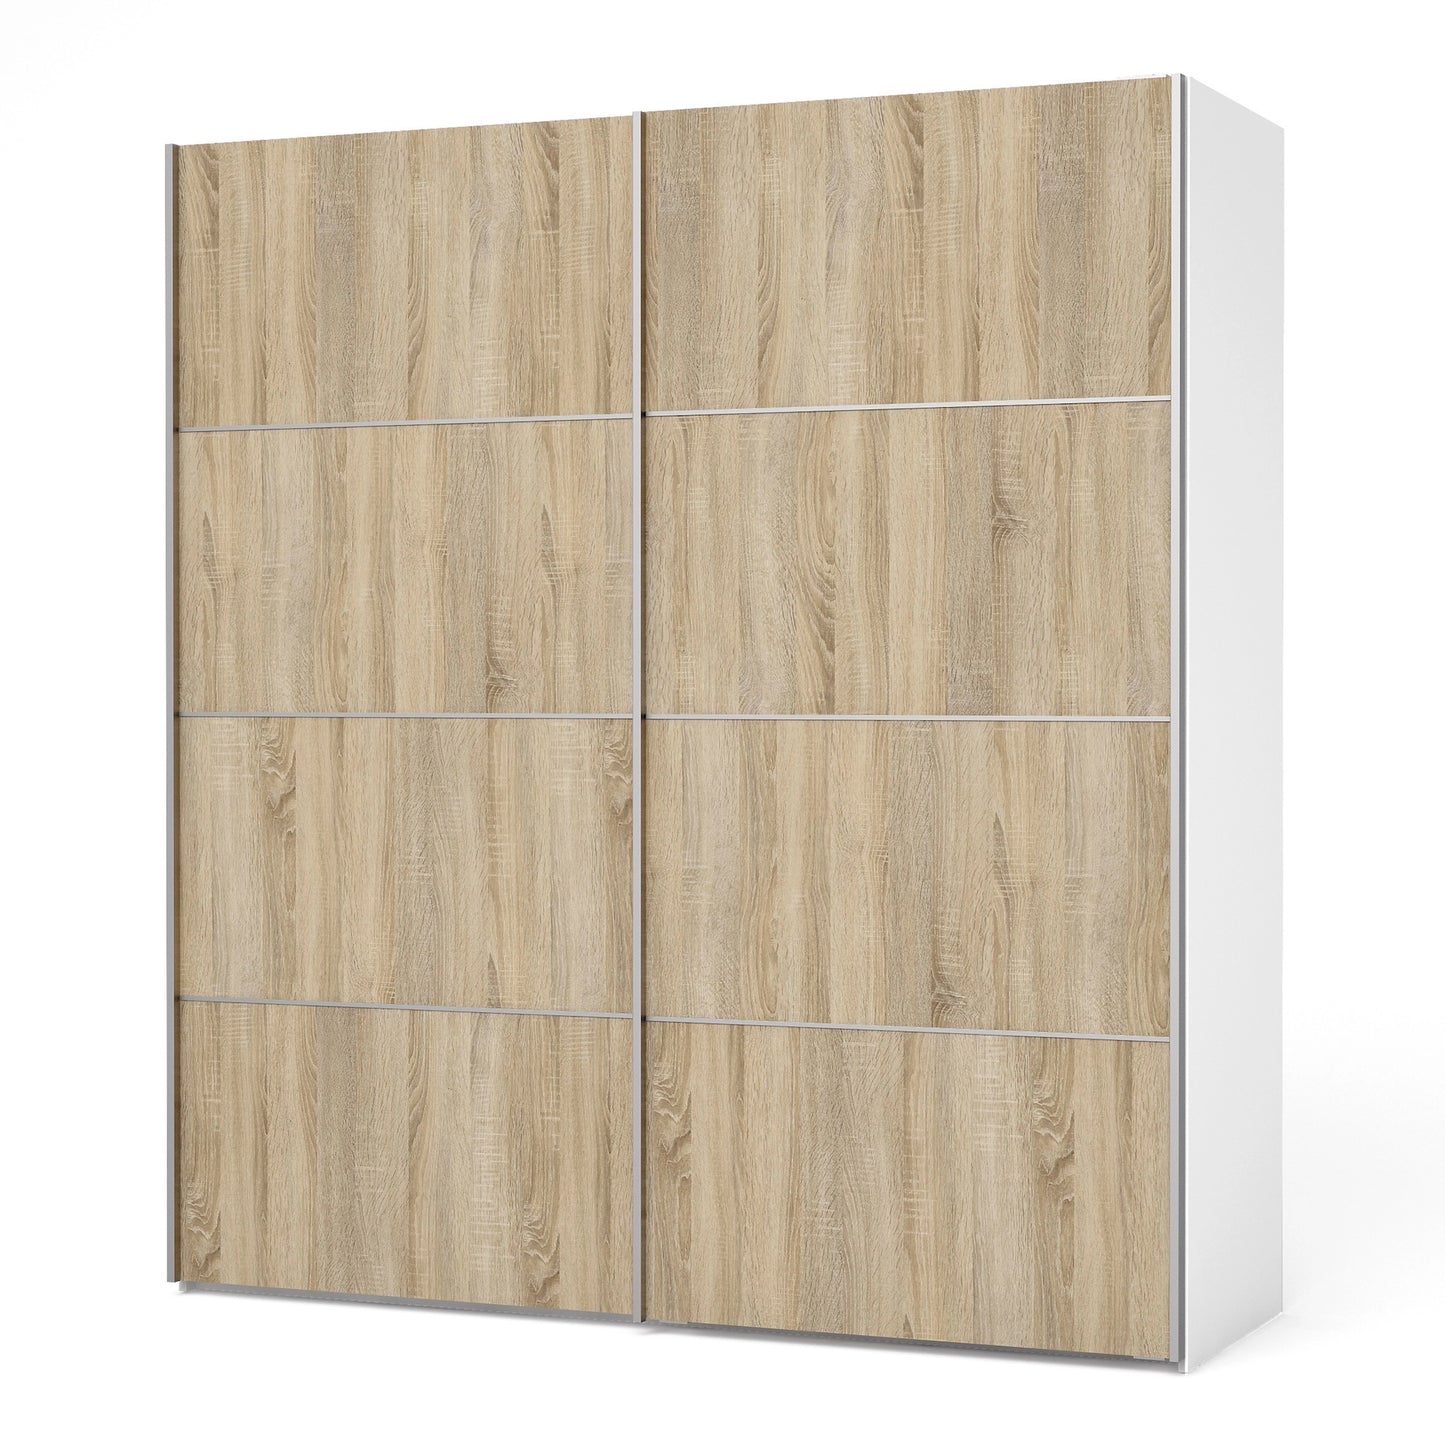 Furniture To Go Verona Sliding Wardrobe 180cm in White with Oak Doors with 5 Shelves